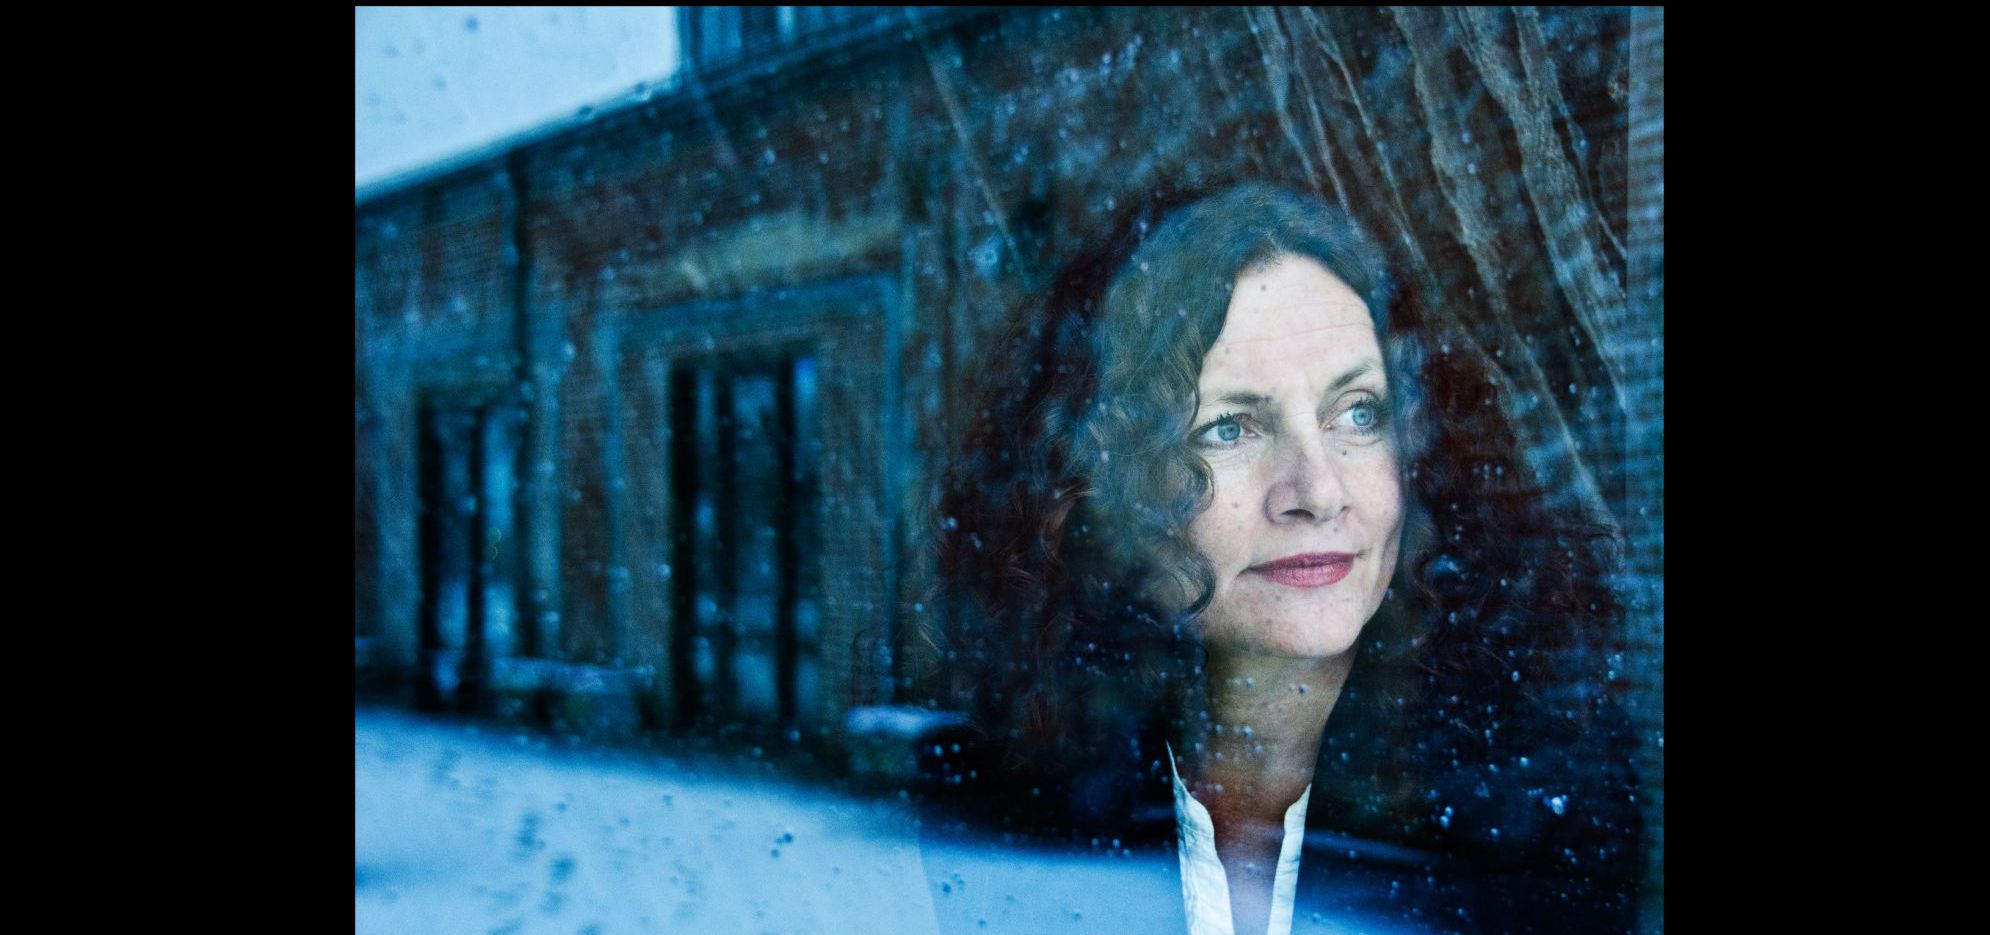 White, Window, Women, Mystery, Solitude, Rain, Human Face, Winter, Snow, Pensive, Sullen, Romance, Dating, One Person, Fine Art Portrait, Portrait, Blue, Female, Beauty, Looking Through Window, Hope, Love, Nostalgia, 40s, Fashion Model, One Woman Only, Anticipation, Storytelling, Waiting, Cold, Beautiful, Disappointment, feelings, Attractive Female, Femininity, Serene People, Artist's Model, Wishing, One Young Woman Only, Raindrop, Fragility, Purity, Innocence